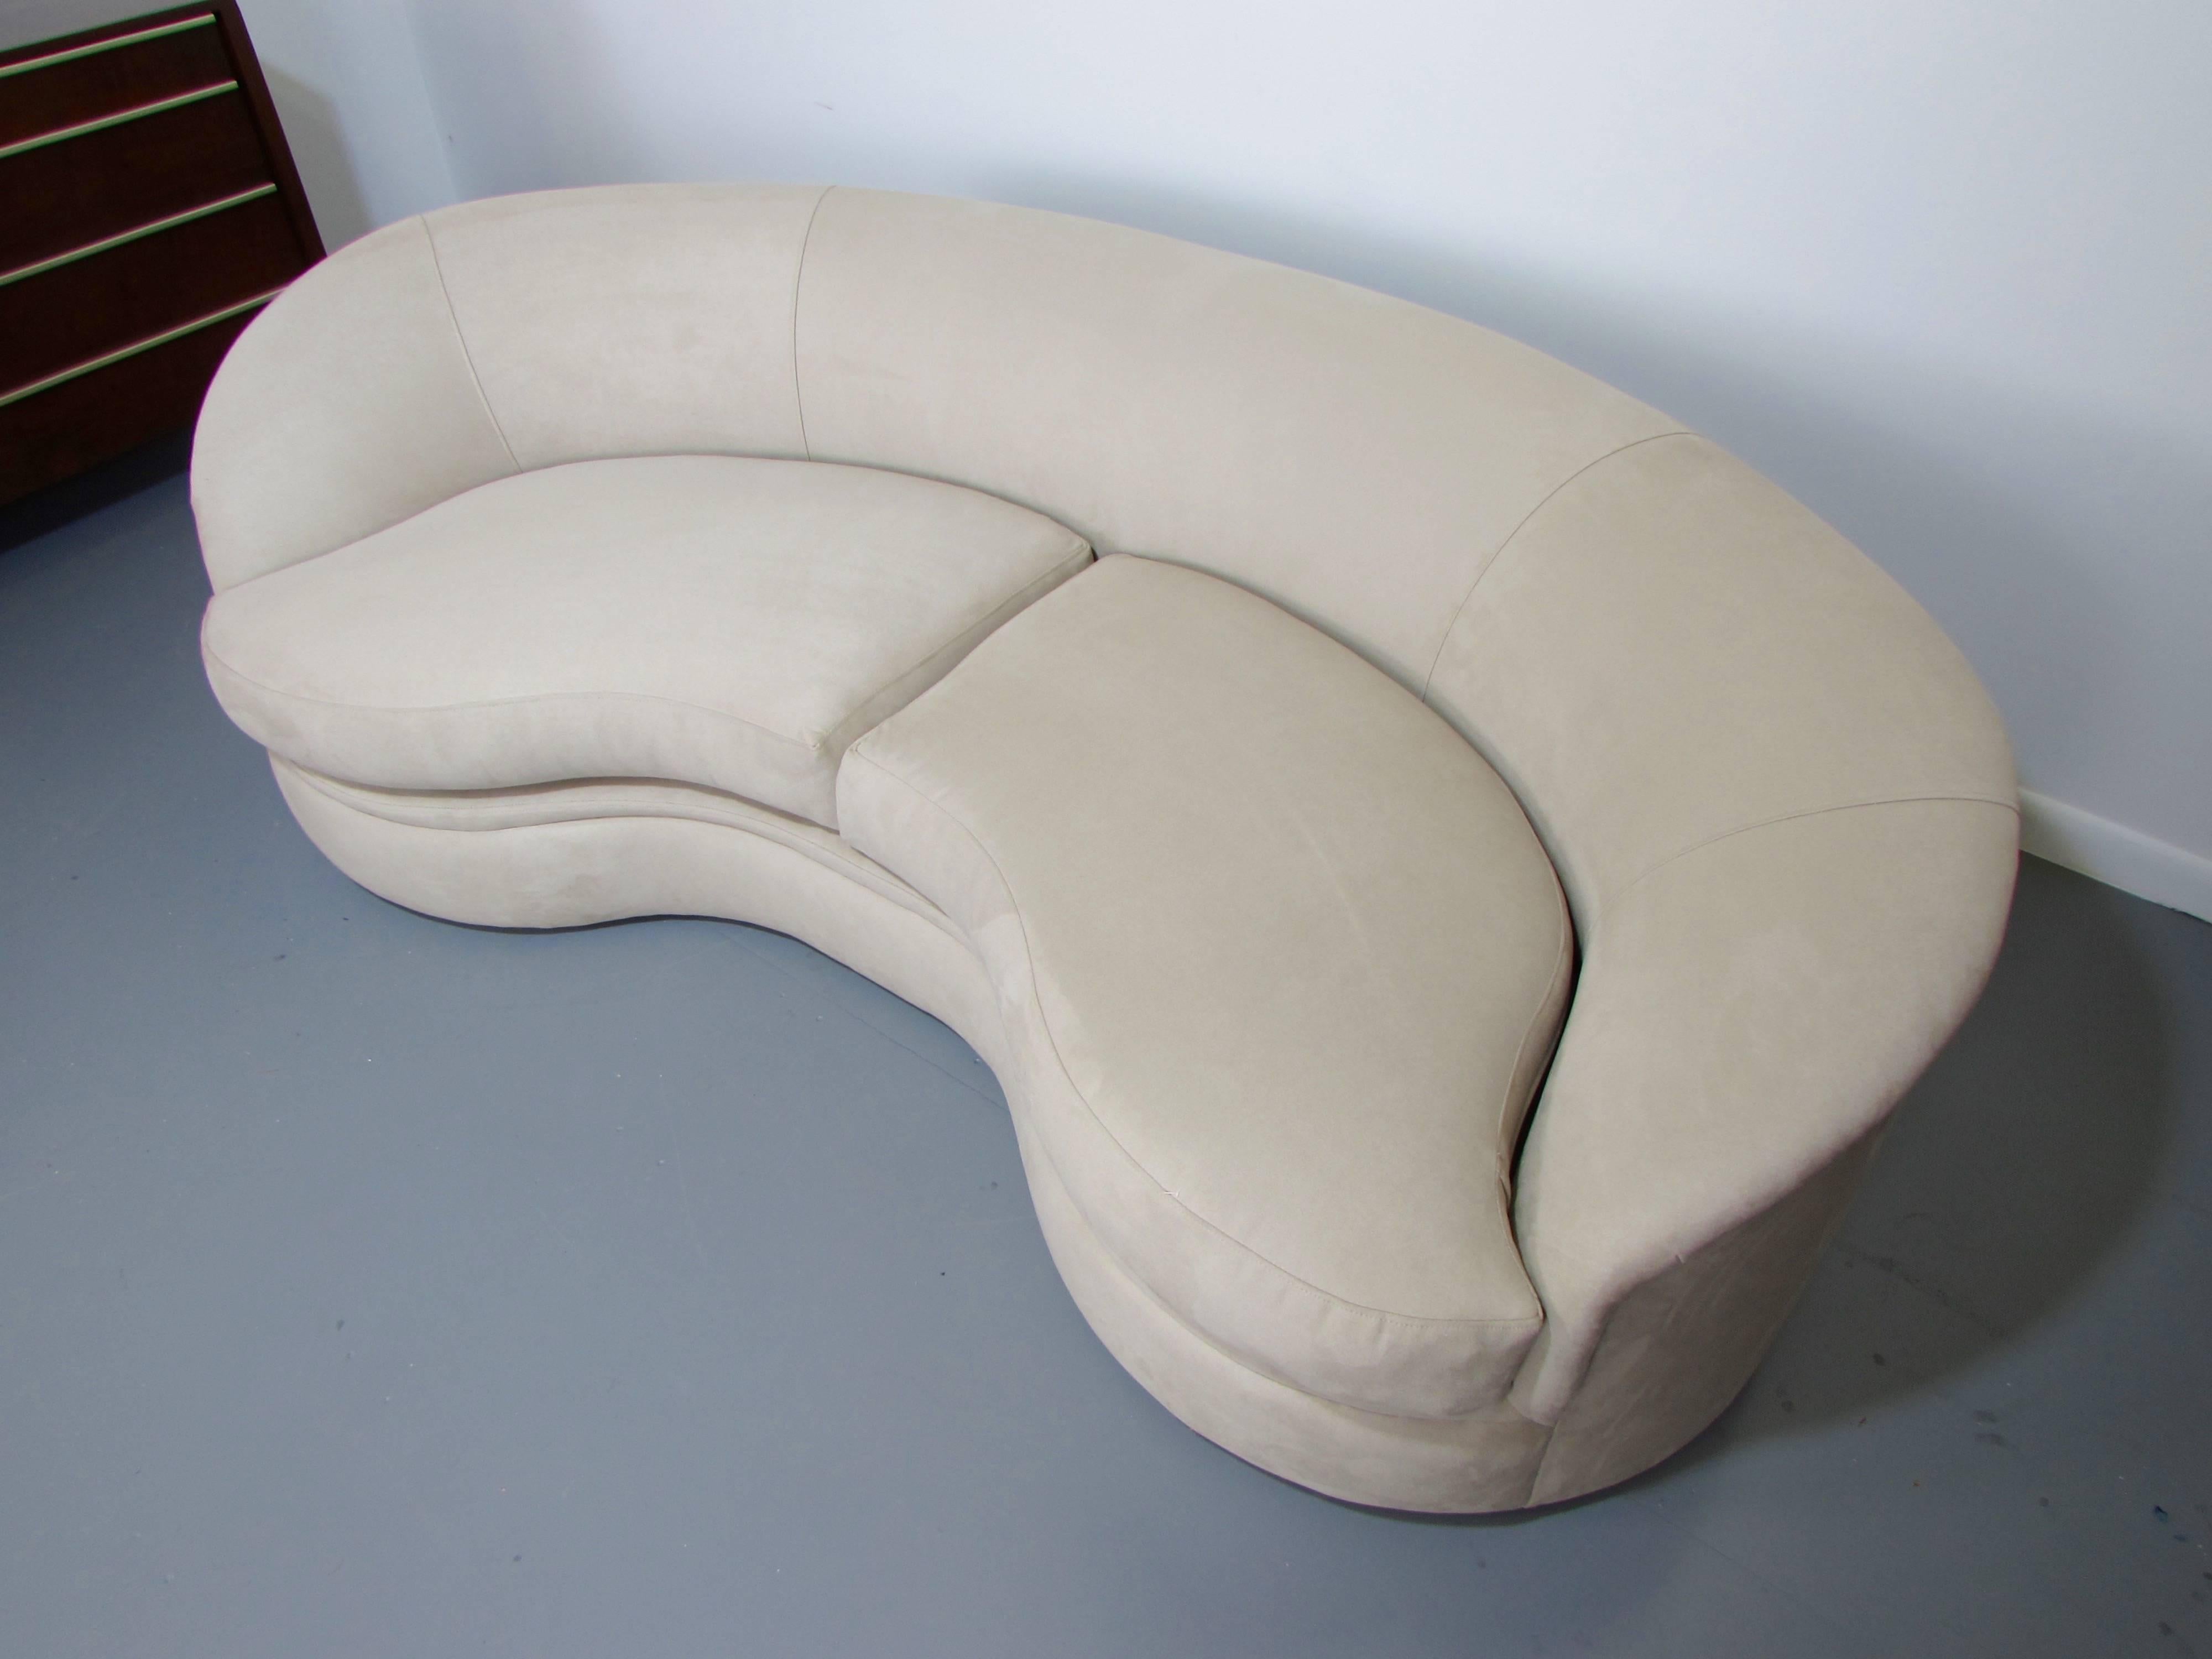 Biomorphic kidney bean shaped sofa by Vladimir Kagan for Directional, 1970s. This piece has been fully restored in an ultra-suede much like the original upholstery.

We offer free regular deliveries to NYC and Philadelphia area. Delivery to DC,